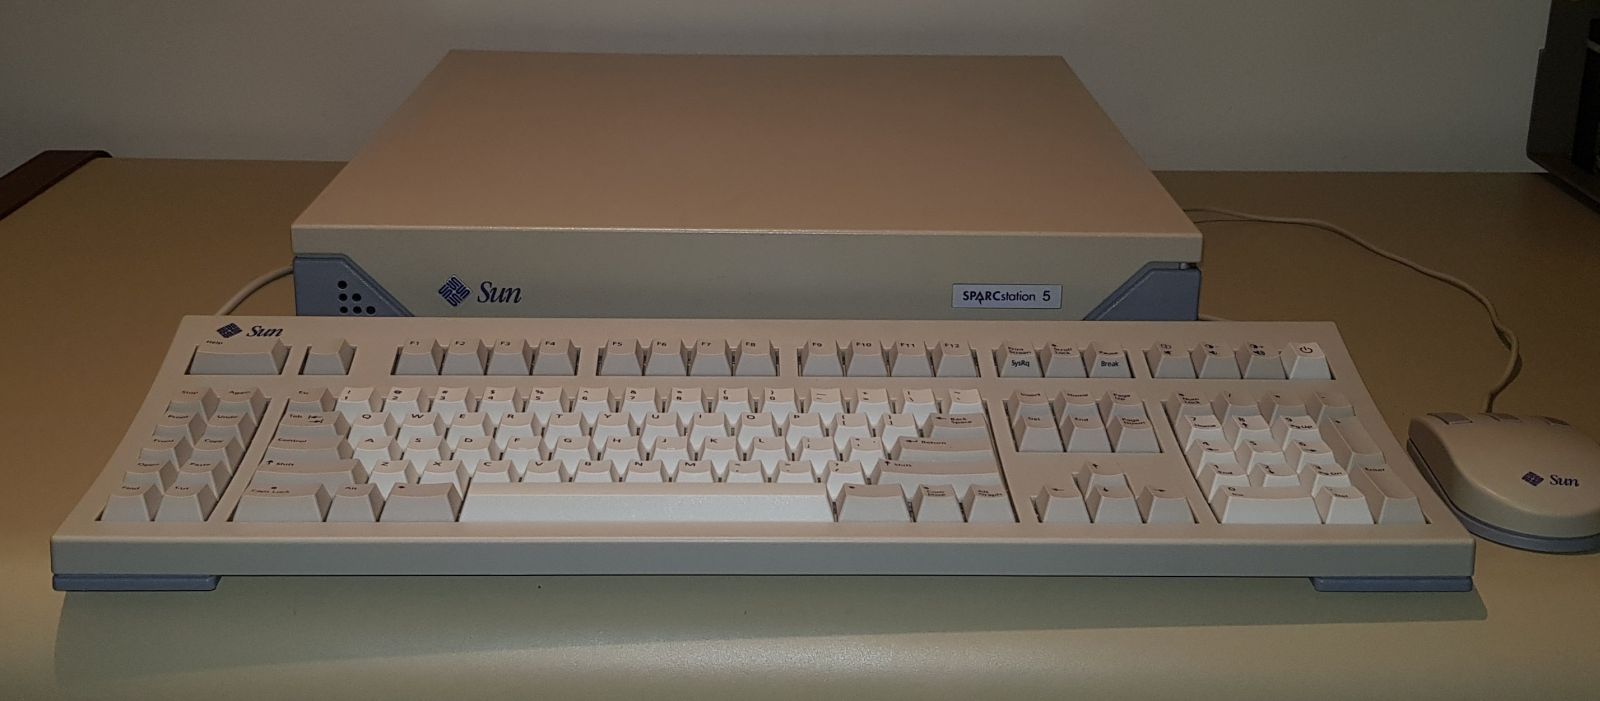 Sun SPARCstation 5 with 136Mb Memory